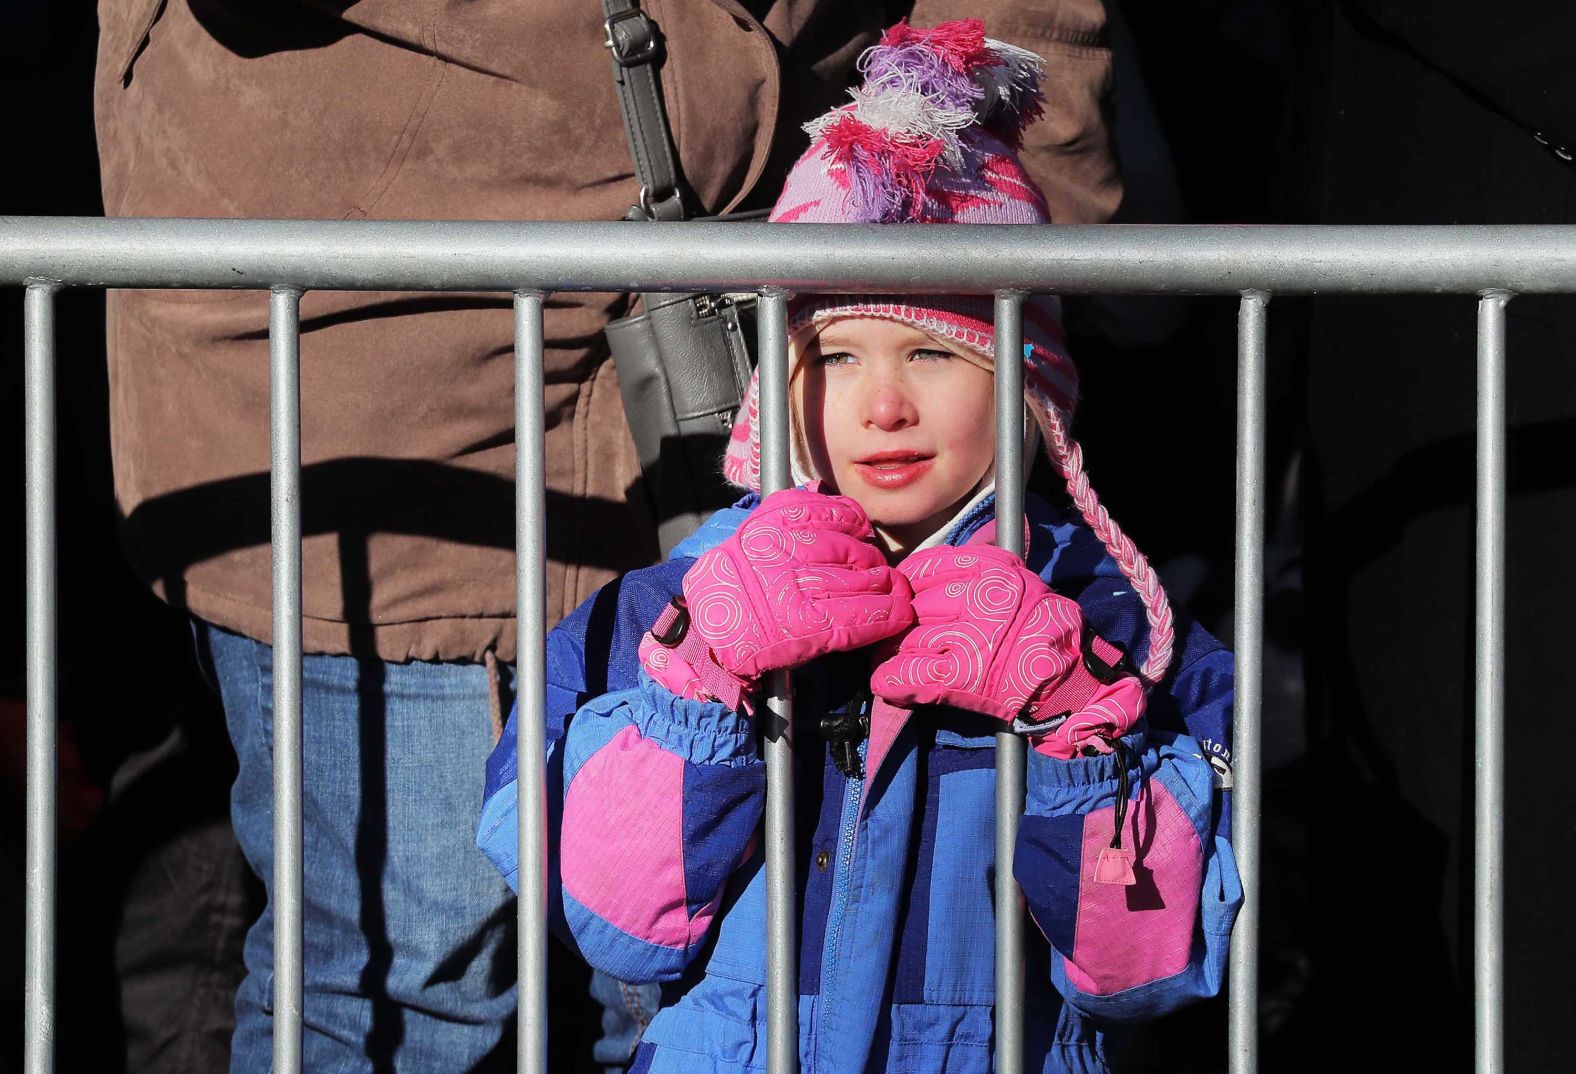 A child watches floats from behind a barricade.